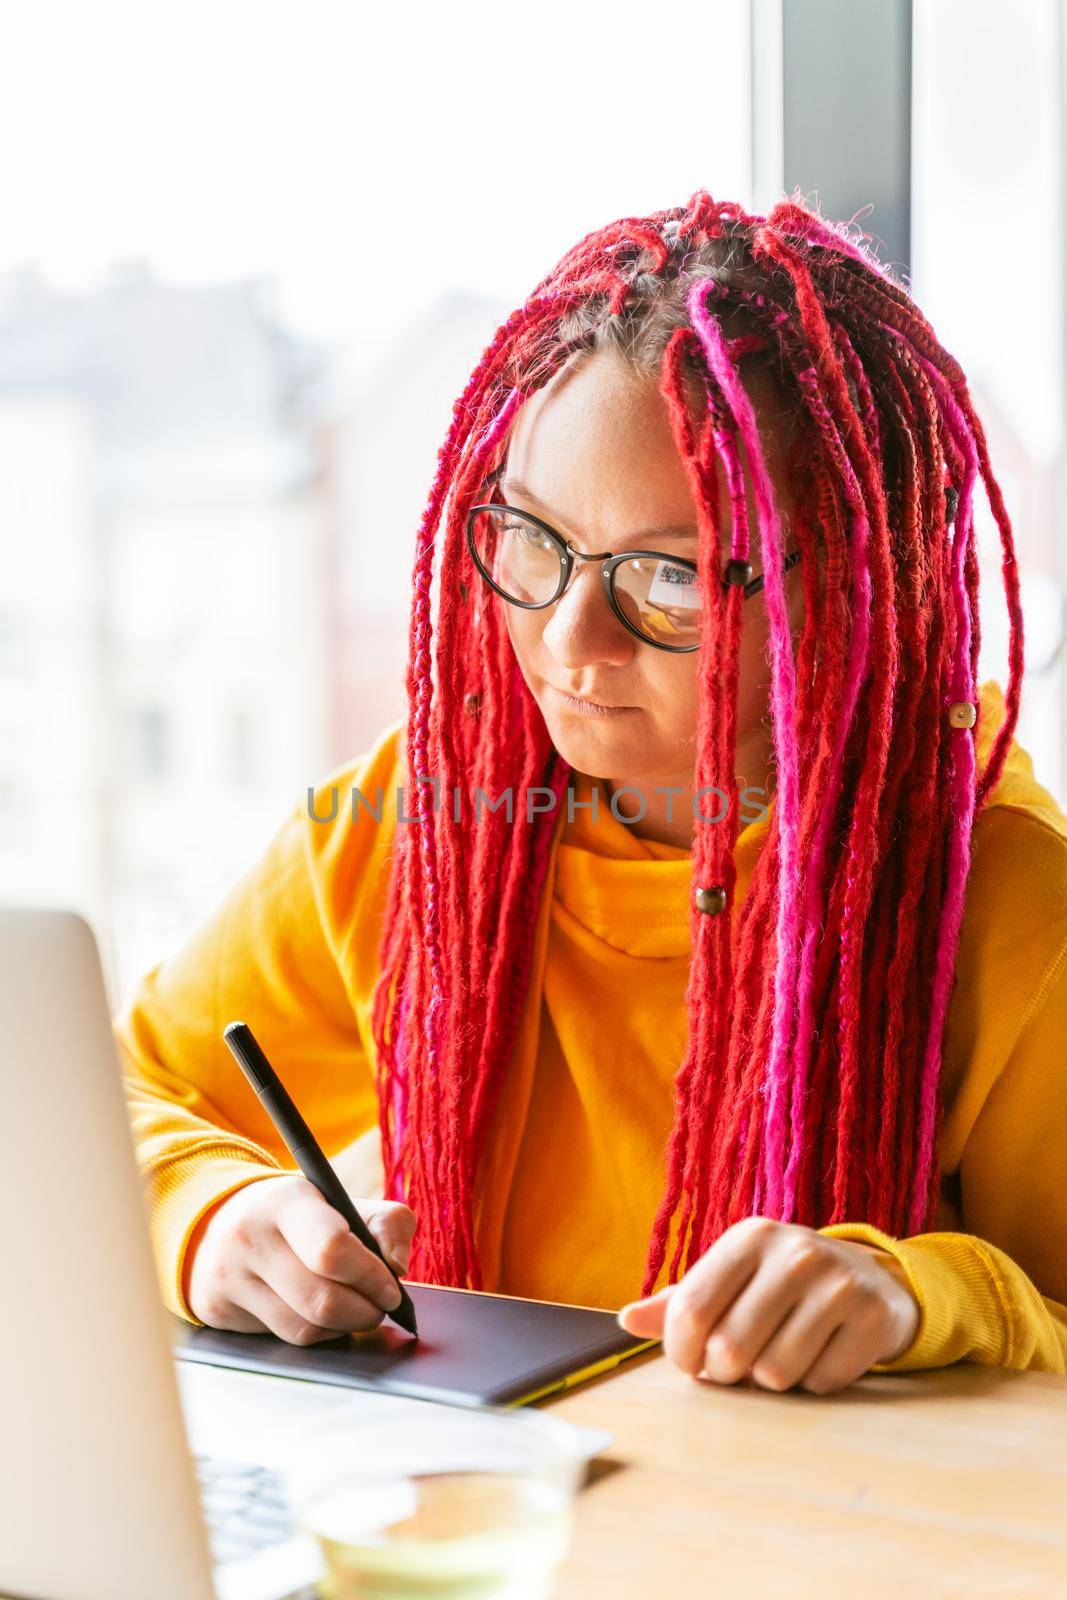 Girl designer, illustrator draws on a tablet, looks into a laptop. The concept of the remote work of a creative hobby, freelance. Woman with long pink hair, bright appearance, vertical